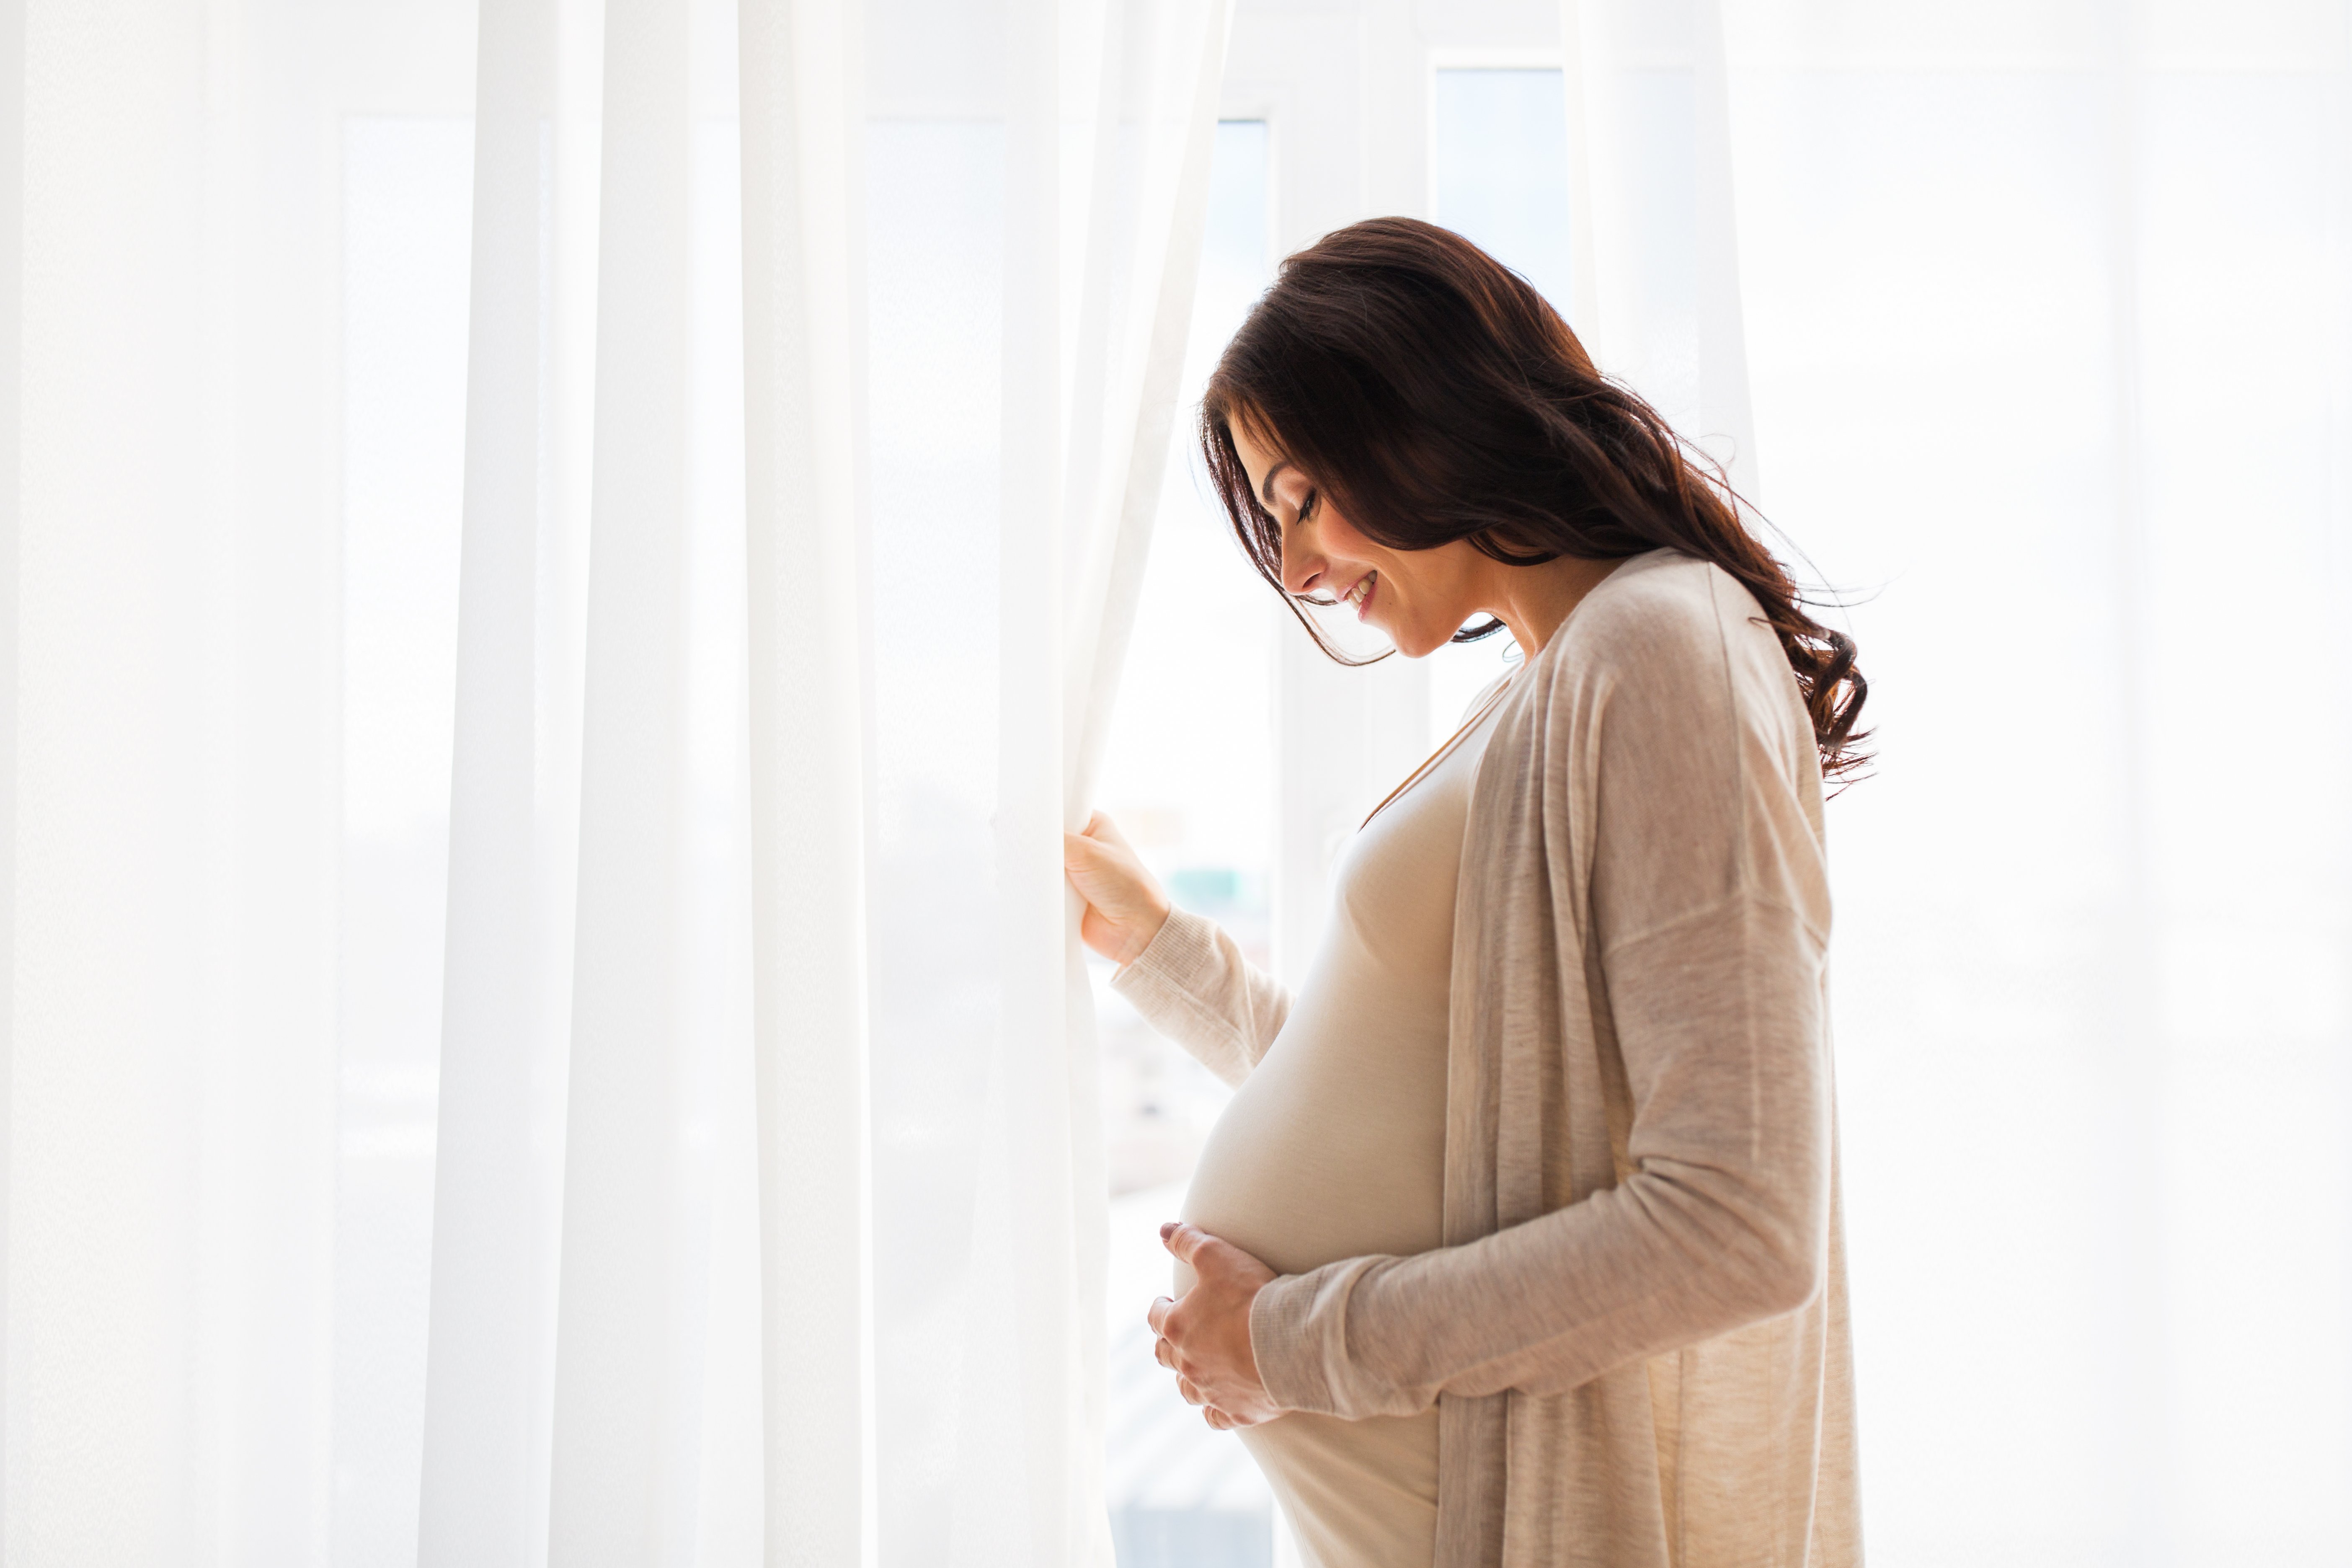 a pregnant woman by the window | Photo: Shutterstock